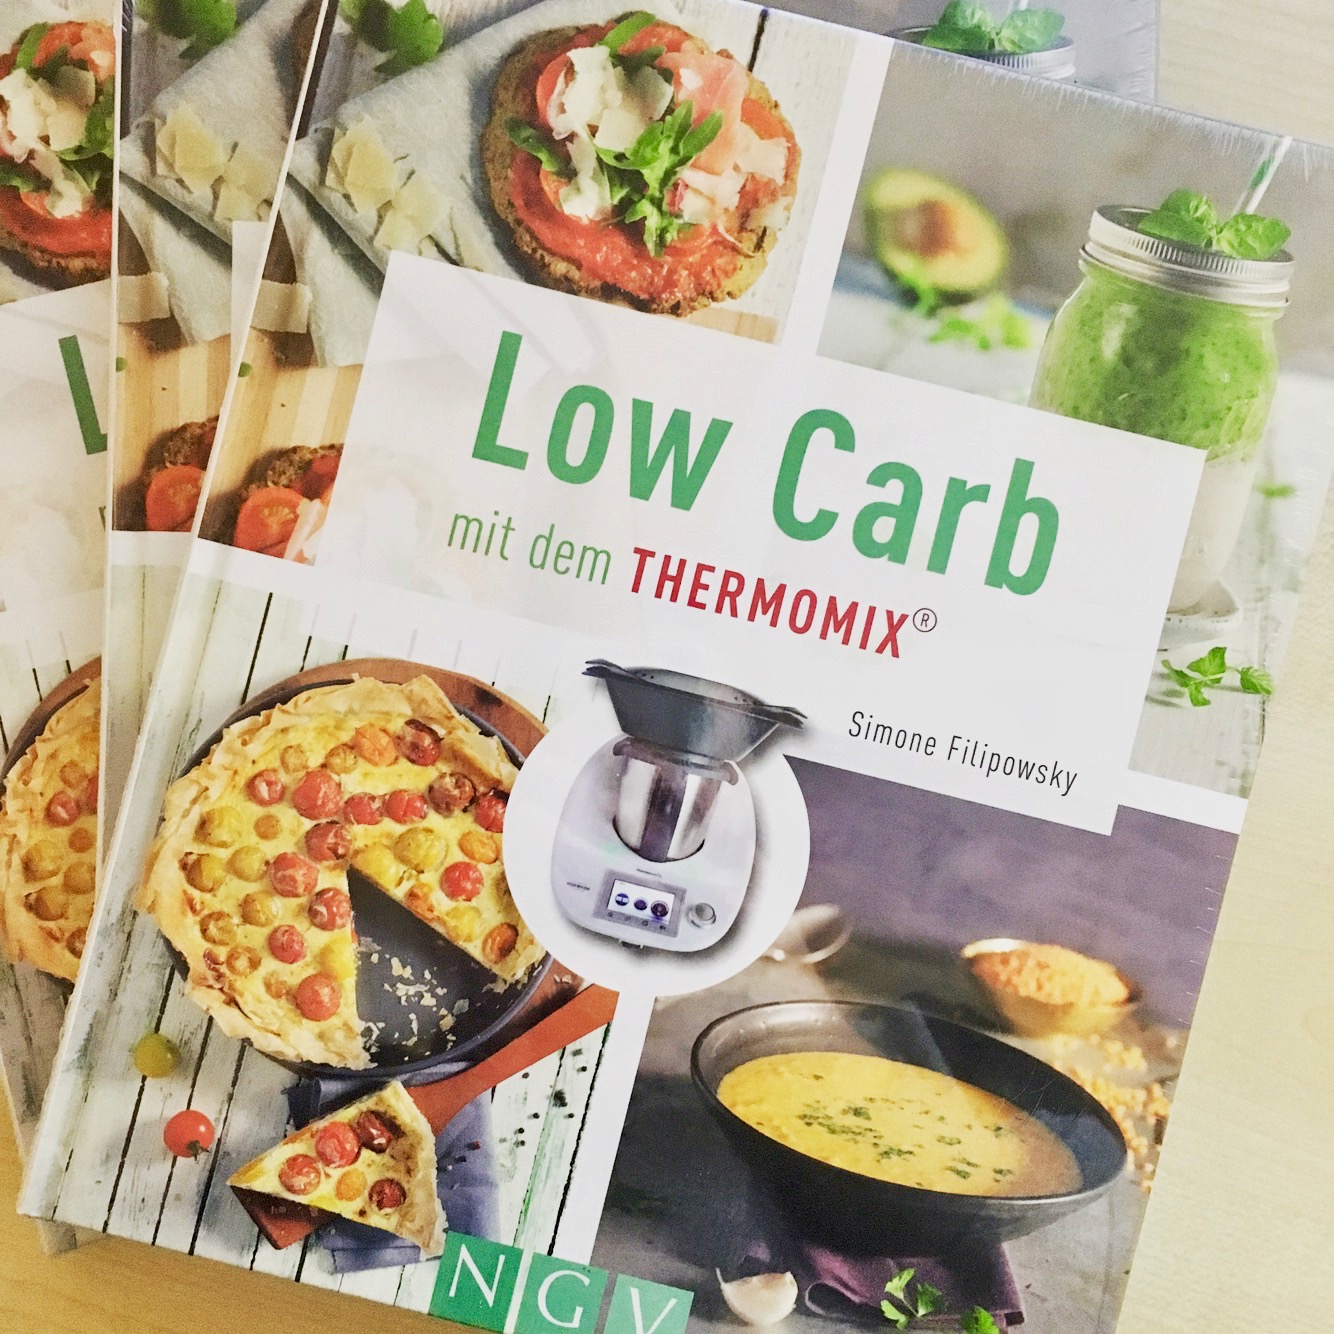 Low Carb Thermomix